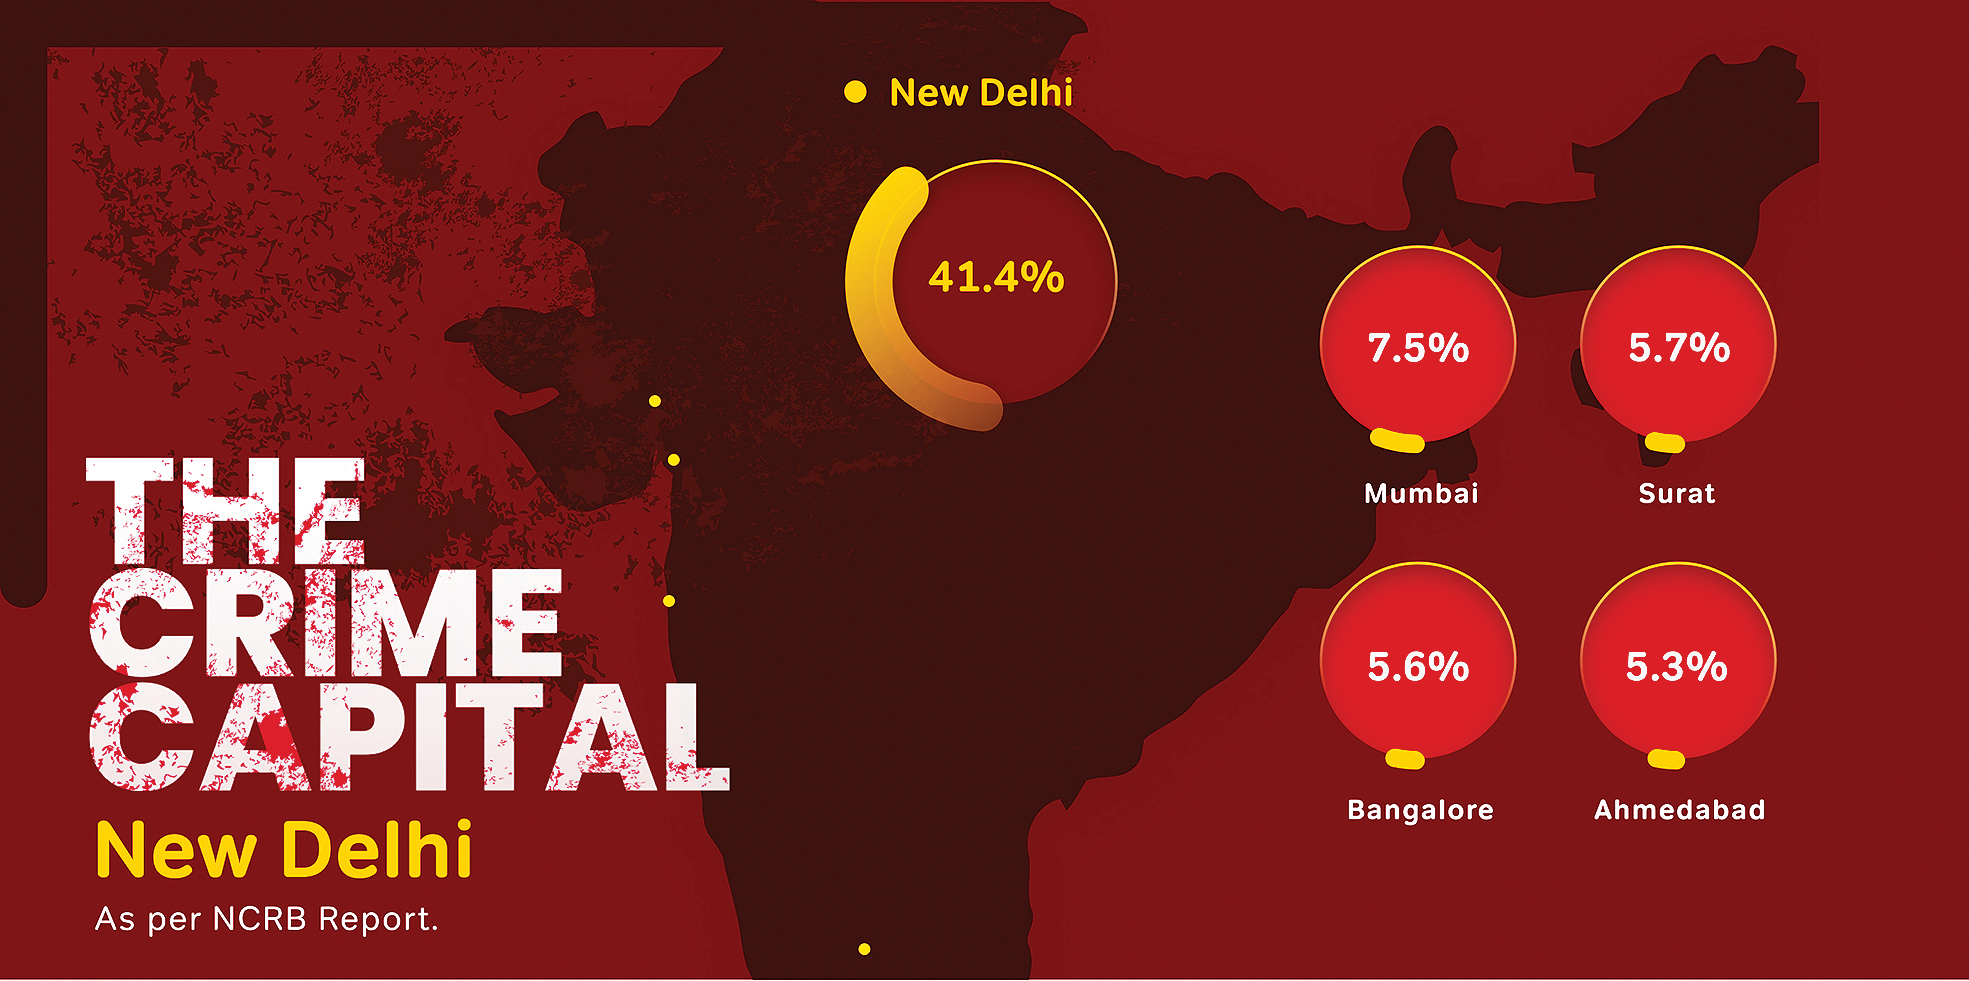 Why Delhi has become the Capital of crime